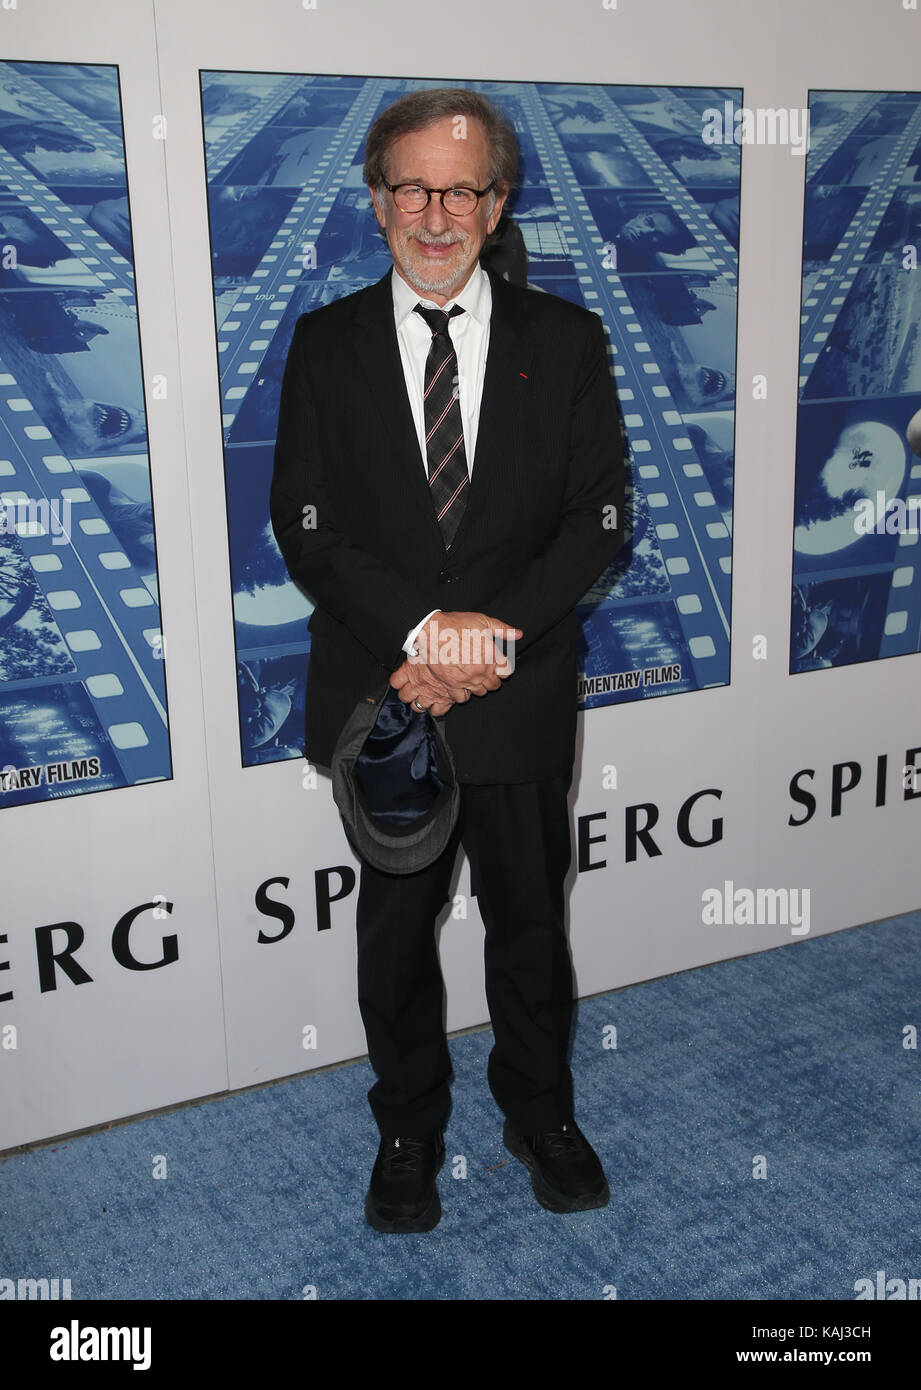 Hollywood, California, USA. 26th Sep, 2017. Steven Spielberg, at HBO'S DOCUMNETARY FILMS SPIELBERG LA PREMIERE at Paramount Studios on September 26, 2017 in Los Angeles, California. Credit: Faye Sadou/Media Punch/Alamy Live News Stock Photo